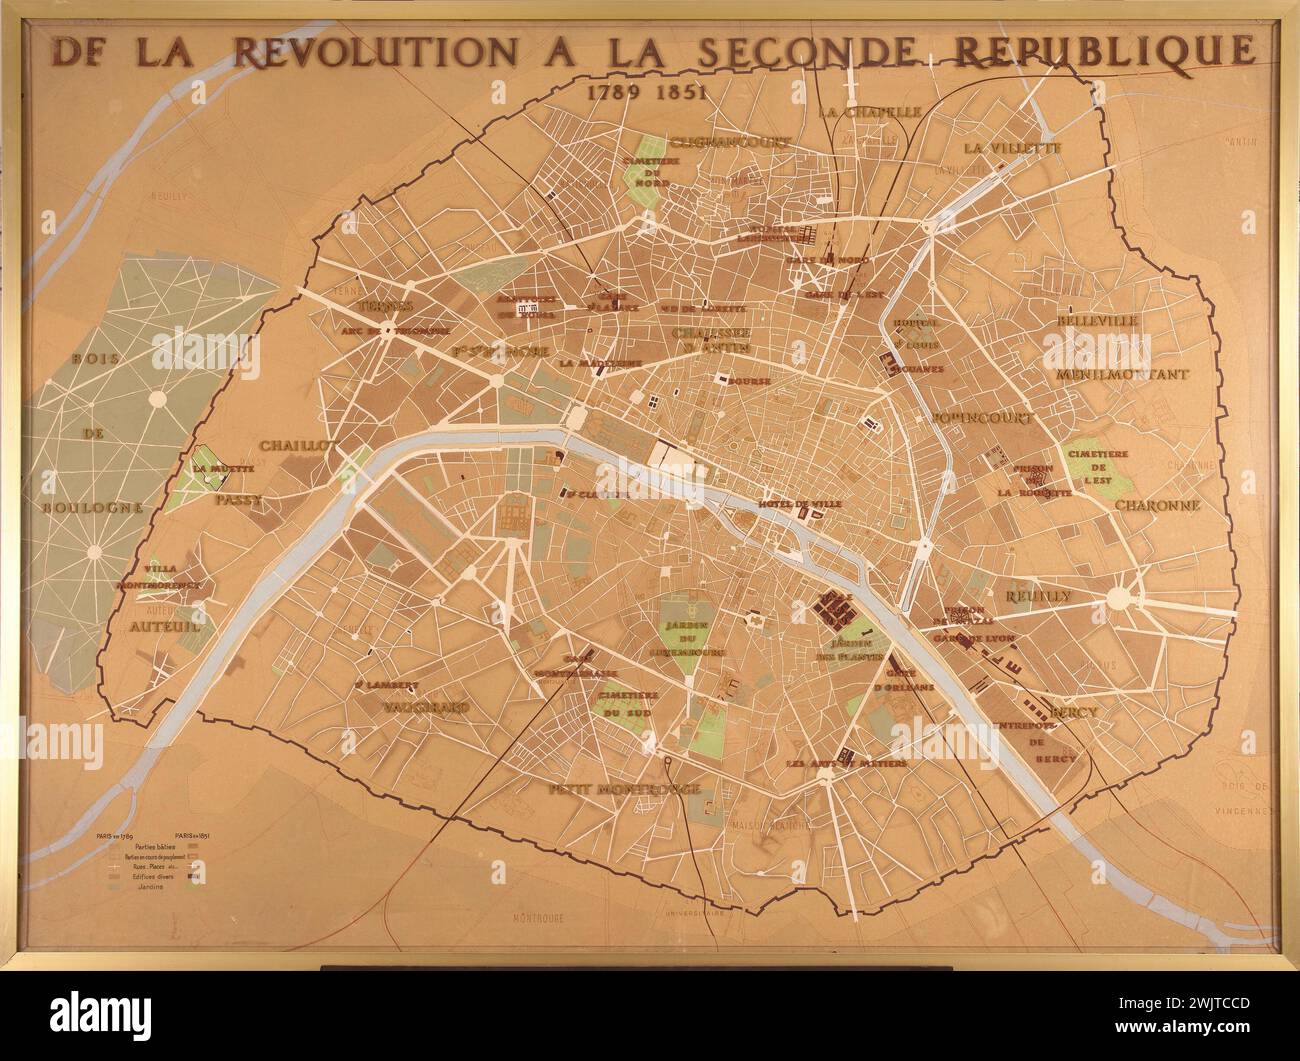 Anonymous. Plan of Paris from the Revolution to the Second Republic, 1789-1851. Ink, gouache and cork on agglomerated wood. Paris, Carnavalet museum. Geographical map, second republic, geography, revolutionary period, Paris plan, French revolution, second republic, urban Stock Photo